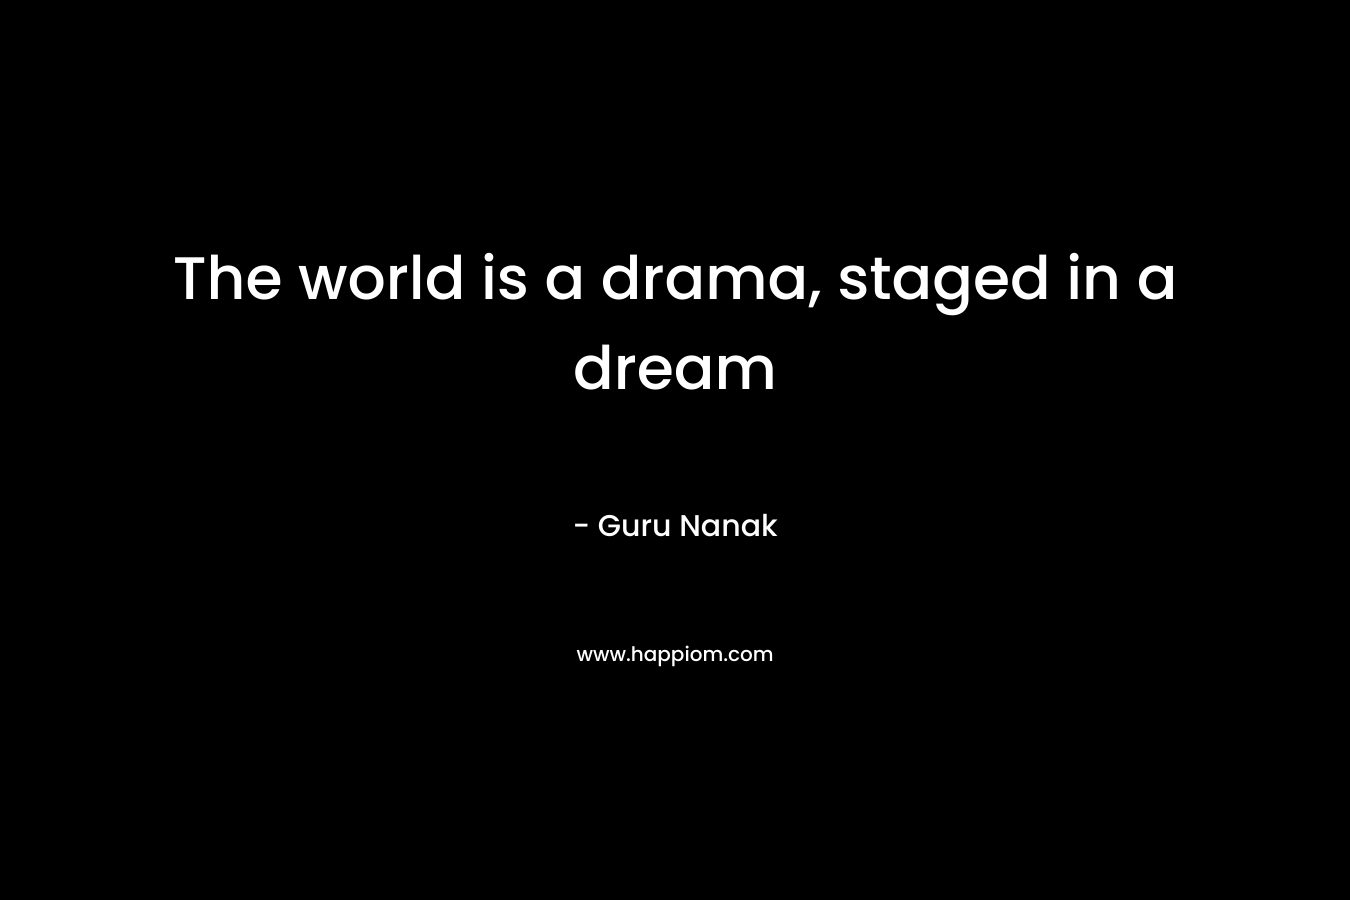 The world is a drama, staged in a dream